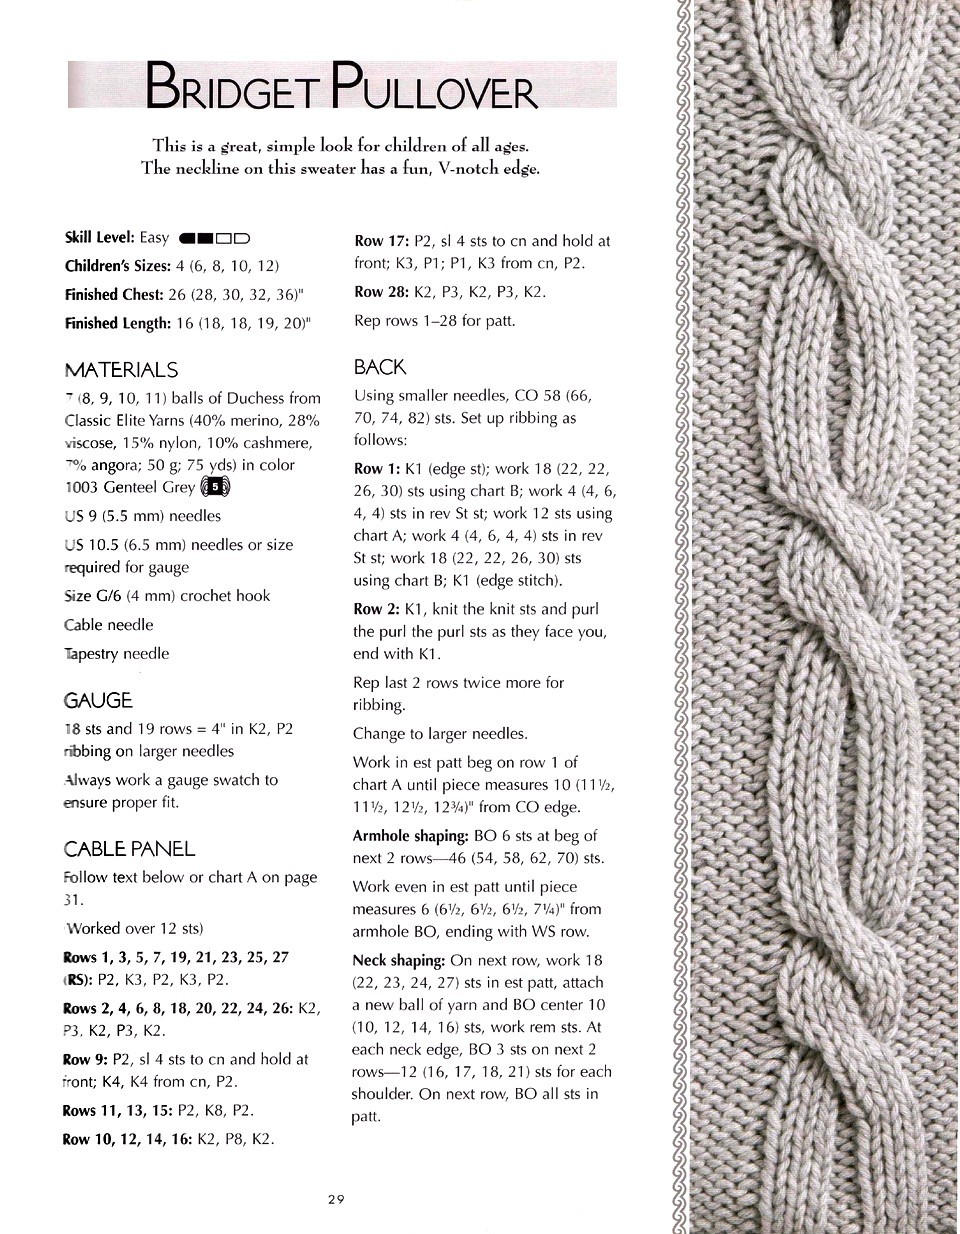 Cable Confidence. A Guide to Textured Knitting - 2008 29